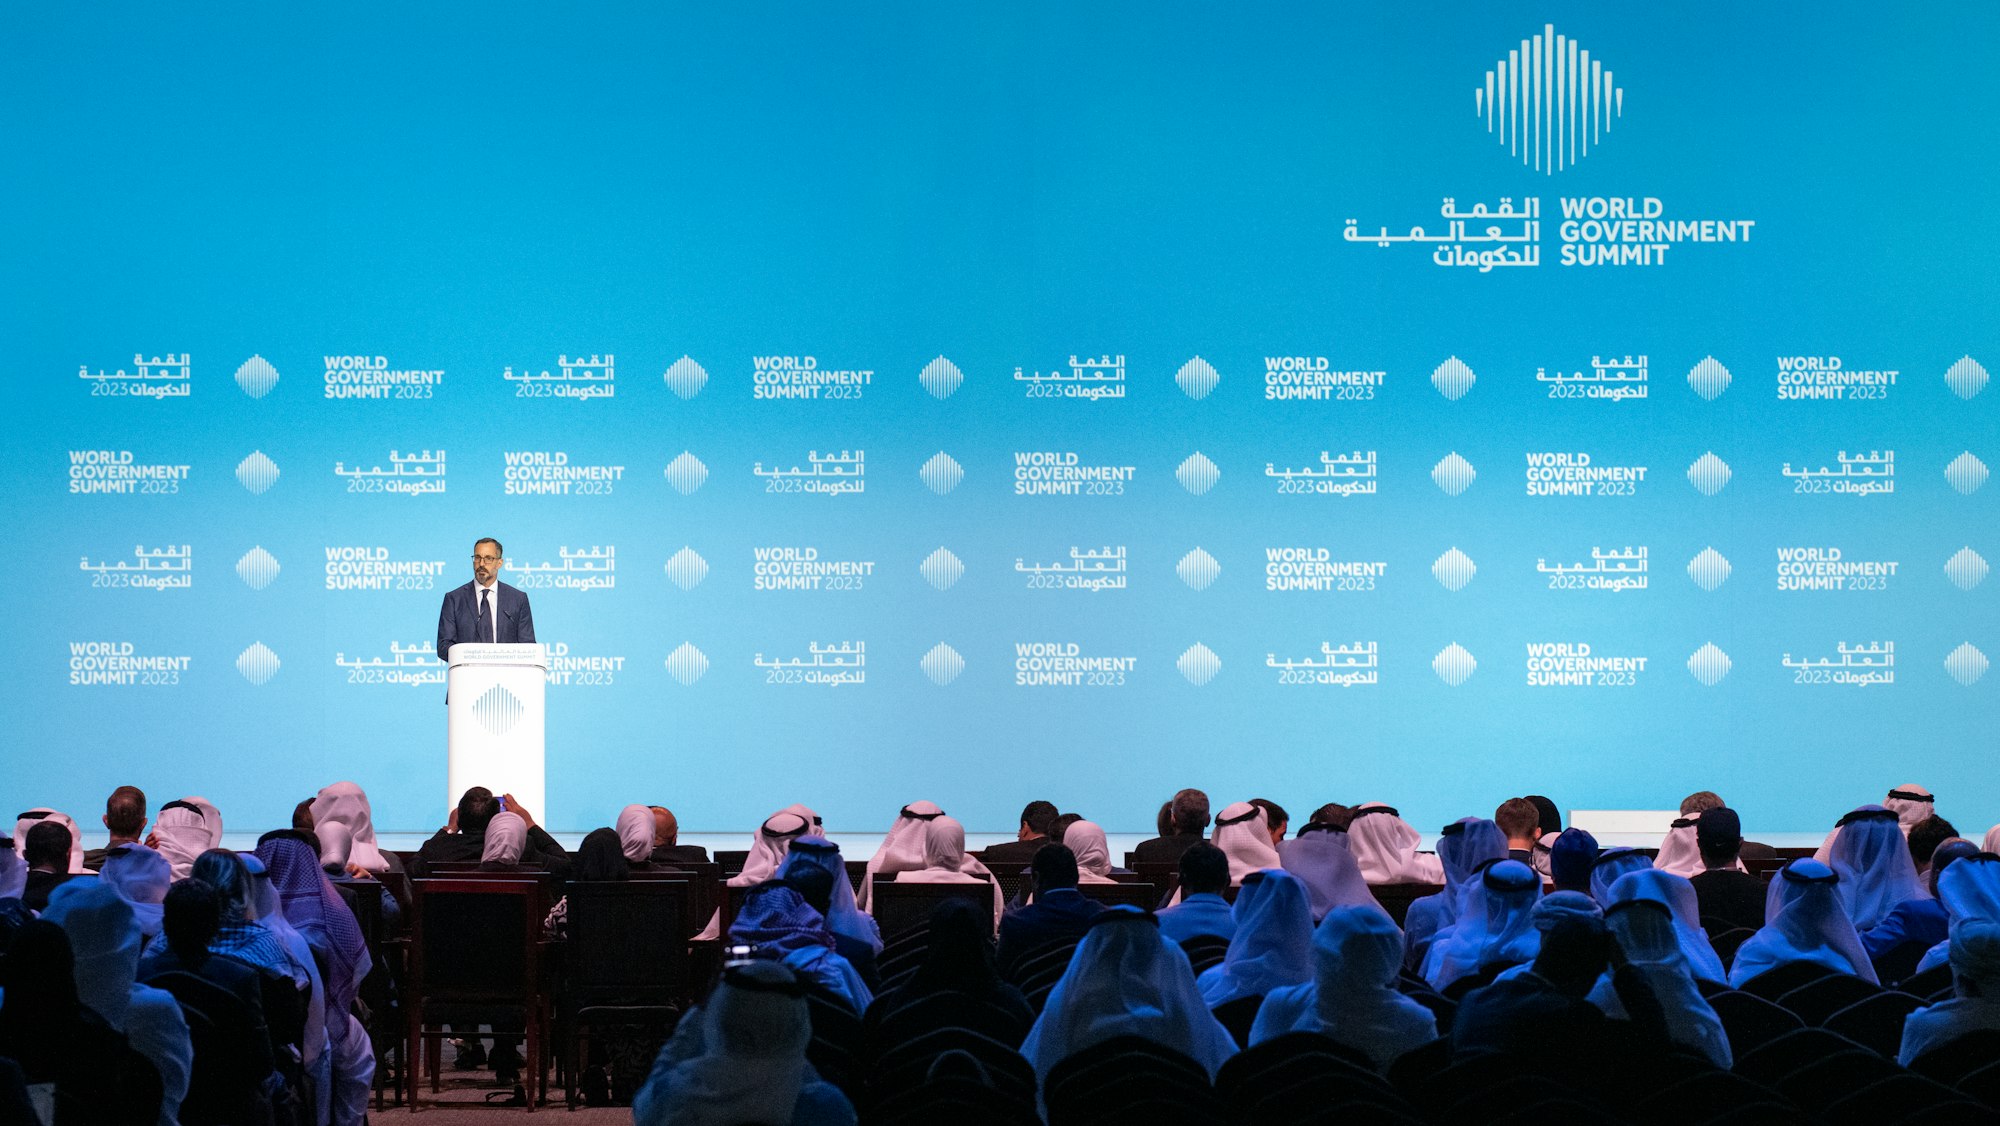 At the World Government Summit in Dubai on 13 February 2023, Prince Rahim Aga Khan spoke about urbanisation in the developing world against the backdrop of climate change. He focused on infrastructure, health and emissions, and showcased the Al-Azhar Park project in Cairo.